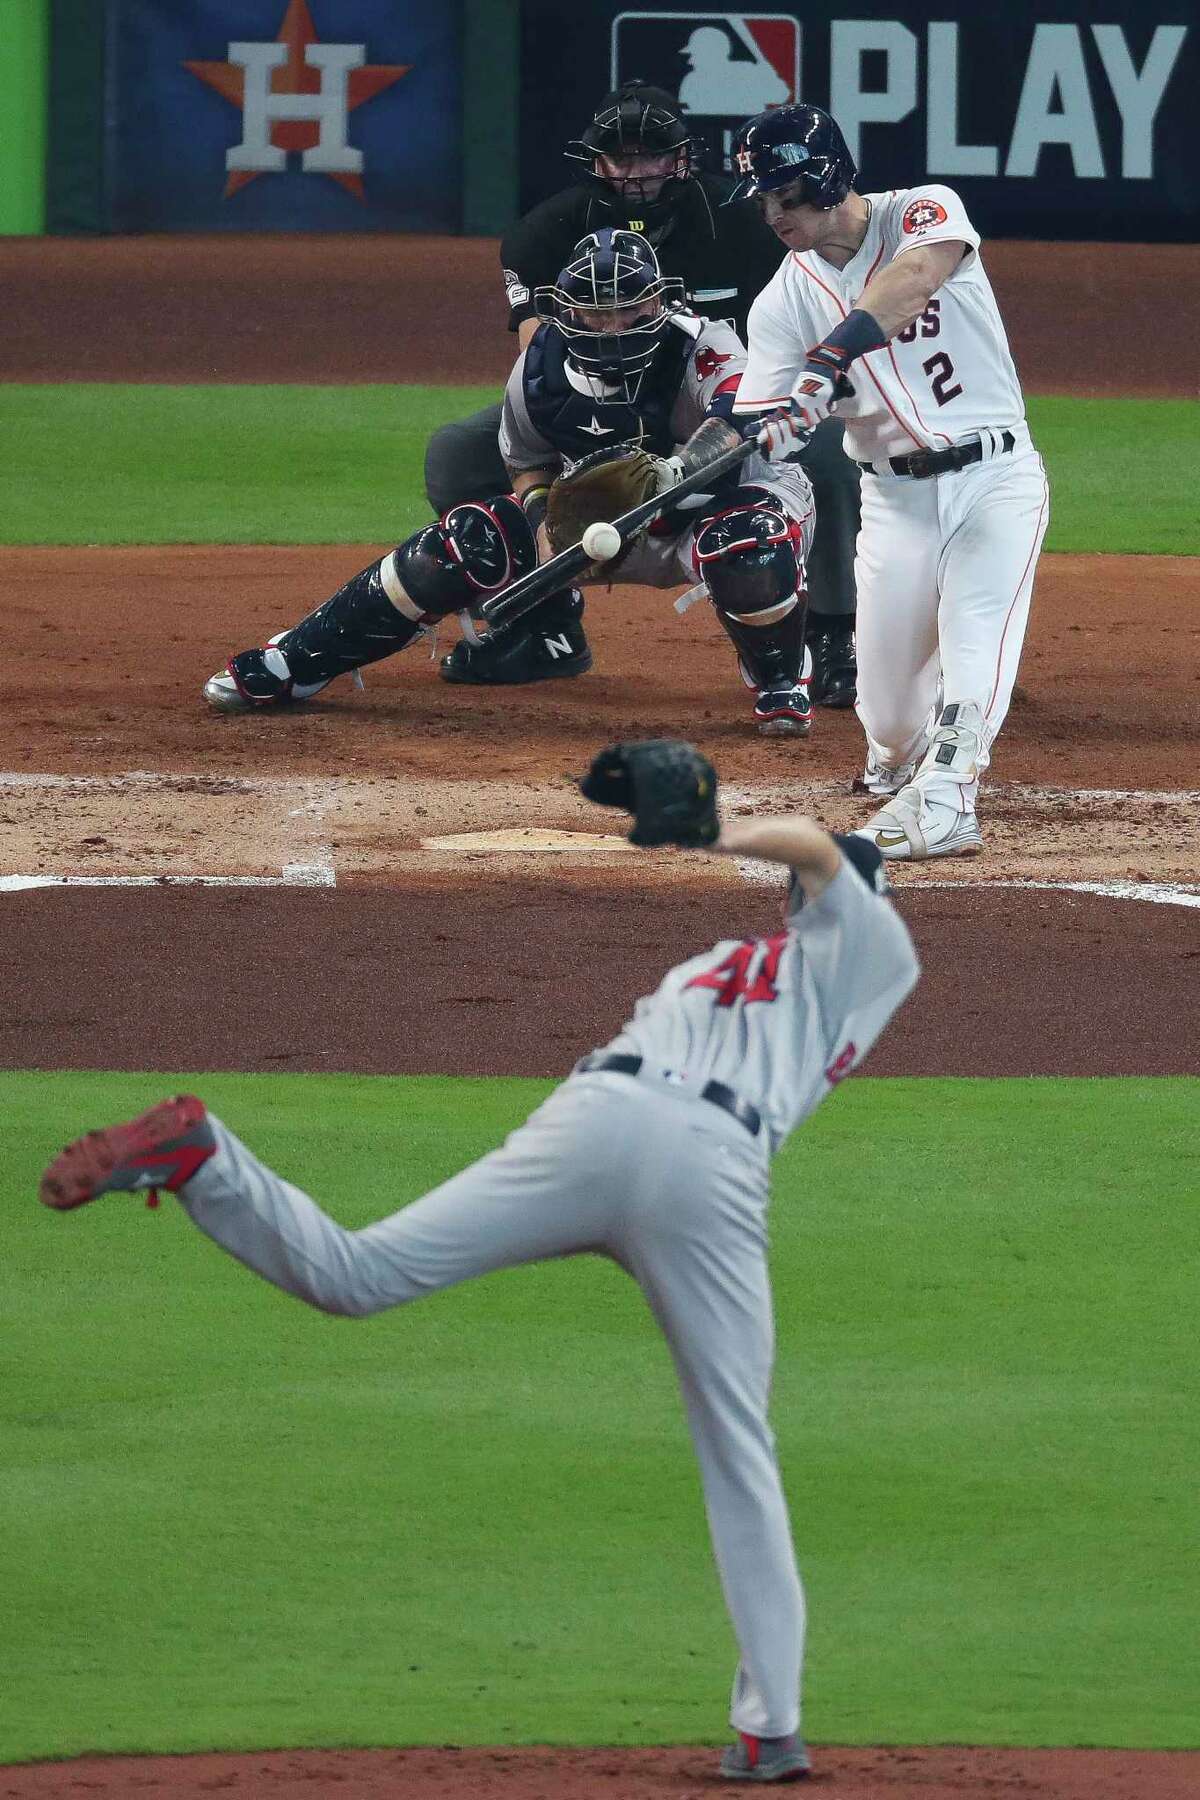 Astros third baseman Alex Bregman found this offering from Red Sox ace Chris Sale to his liking in the first inning of Game 1, hammering it for a solo home run that triggered an 8-2 victory.